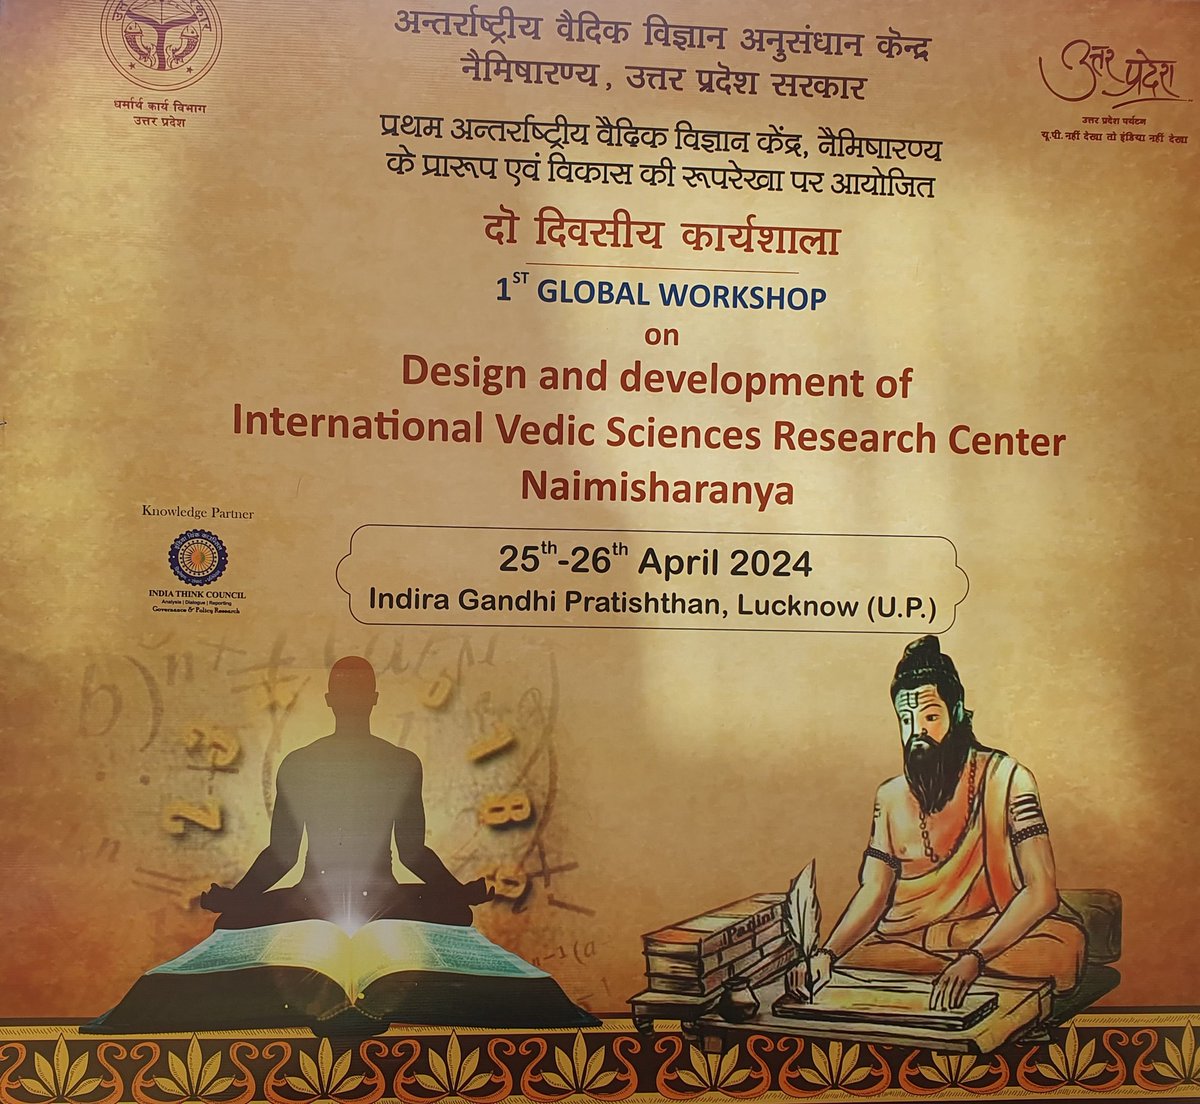 Happy to be a part of this conference in Lucknow where some of the best minds in the country have assembled to discuss the revival of ancient Indian Knowledge.